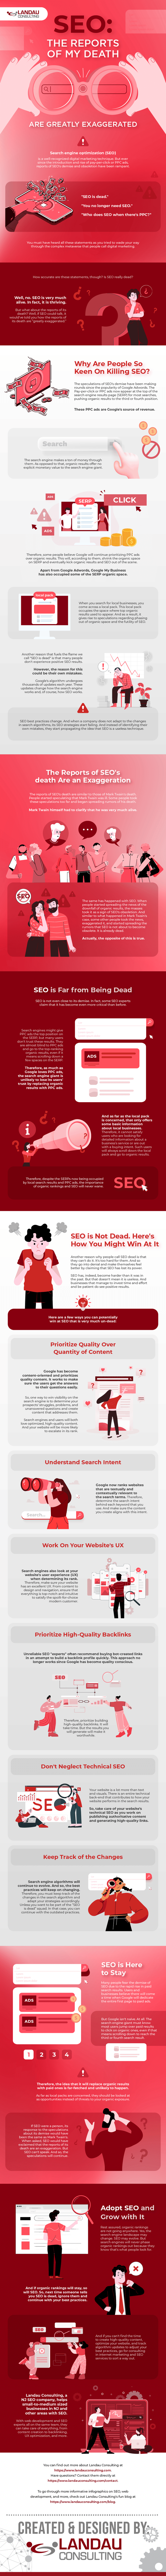 SEO-The-Reports-of-My-Death-Are-Greatly-Exaggerated-Infographic-Image-DGH